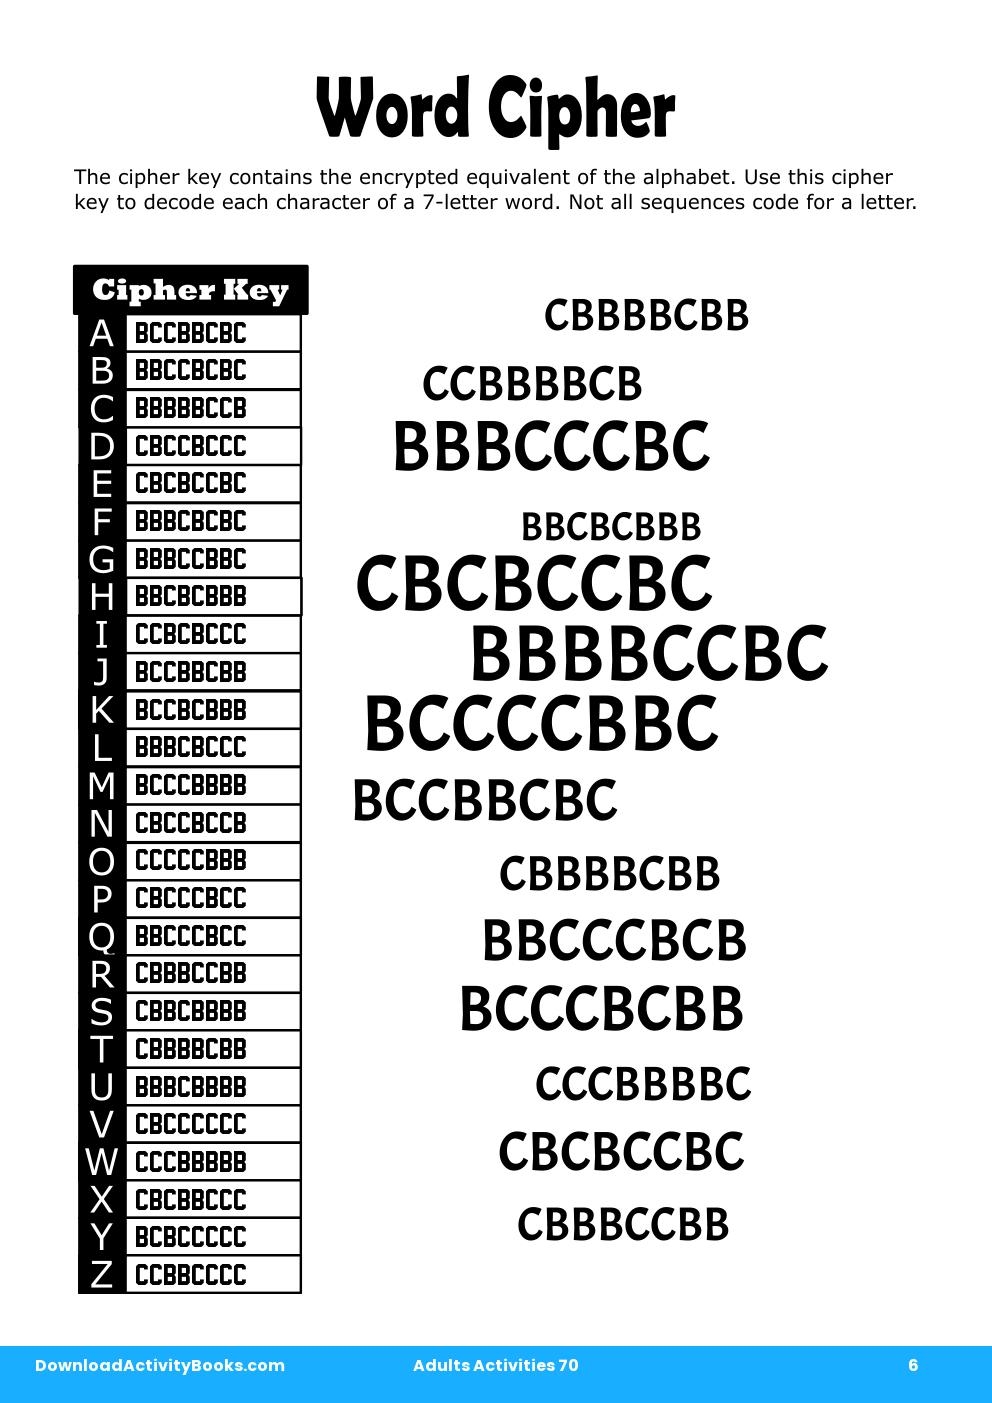 Word Cipher in Adults Activities 70